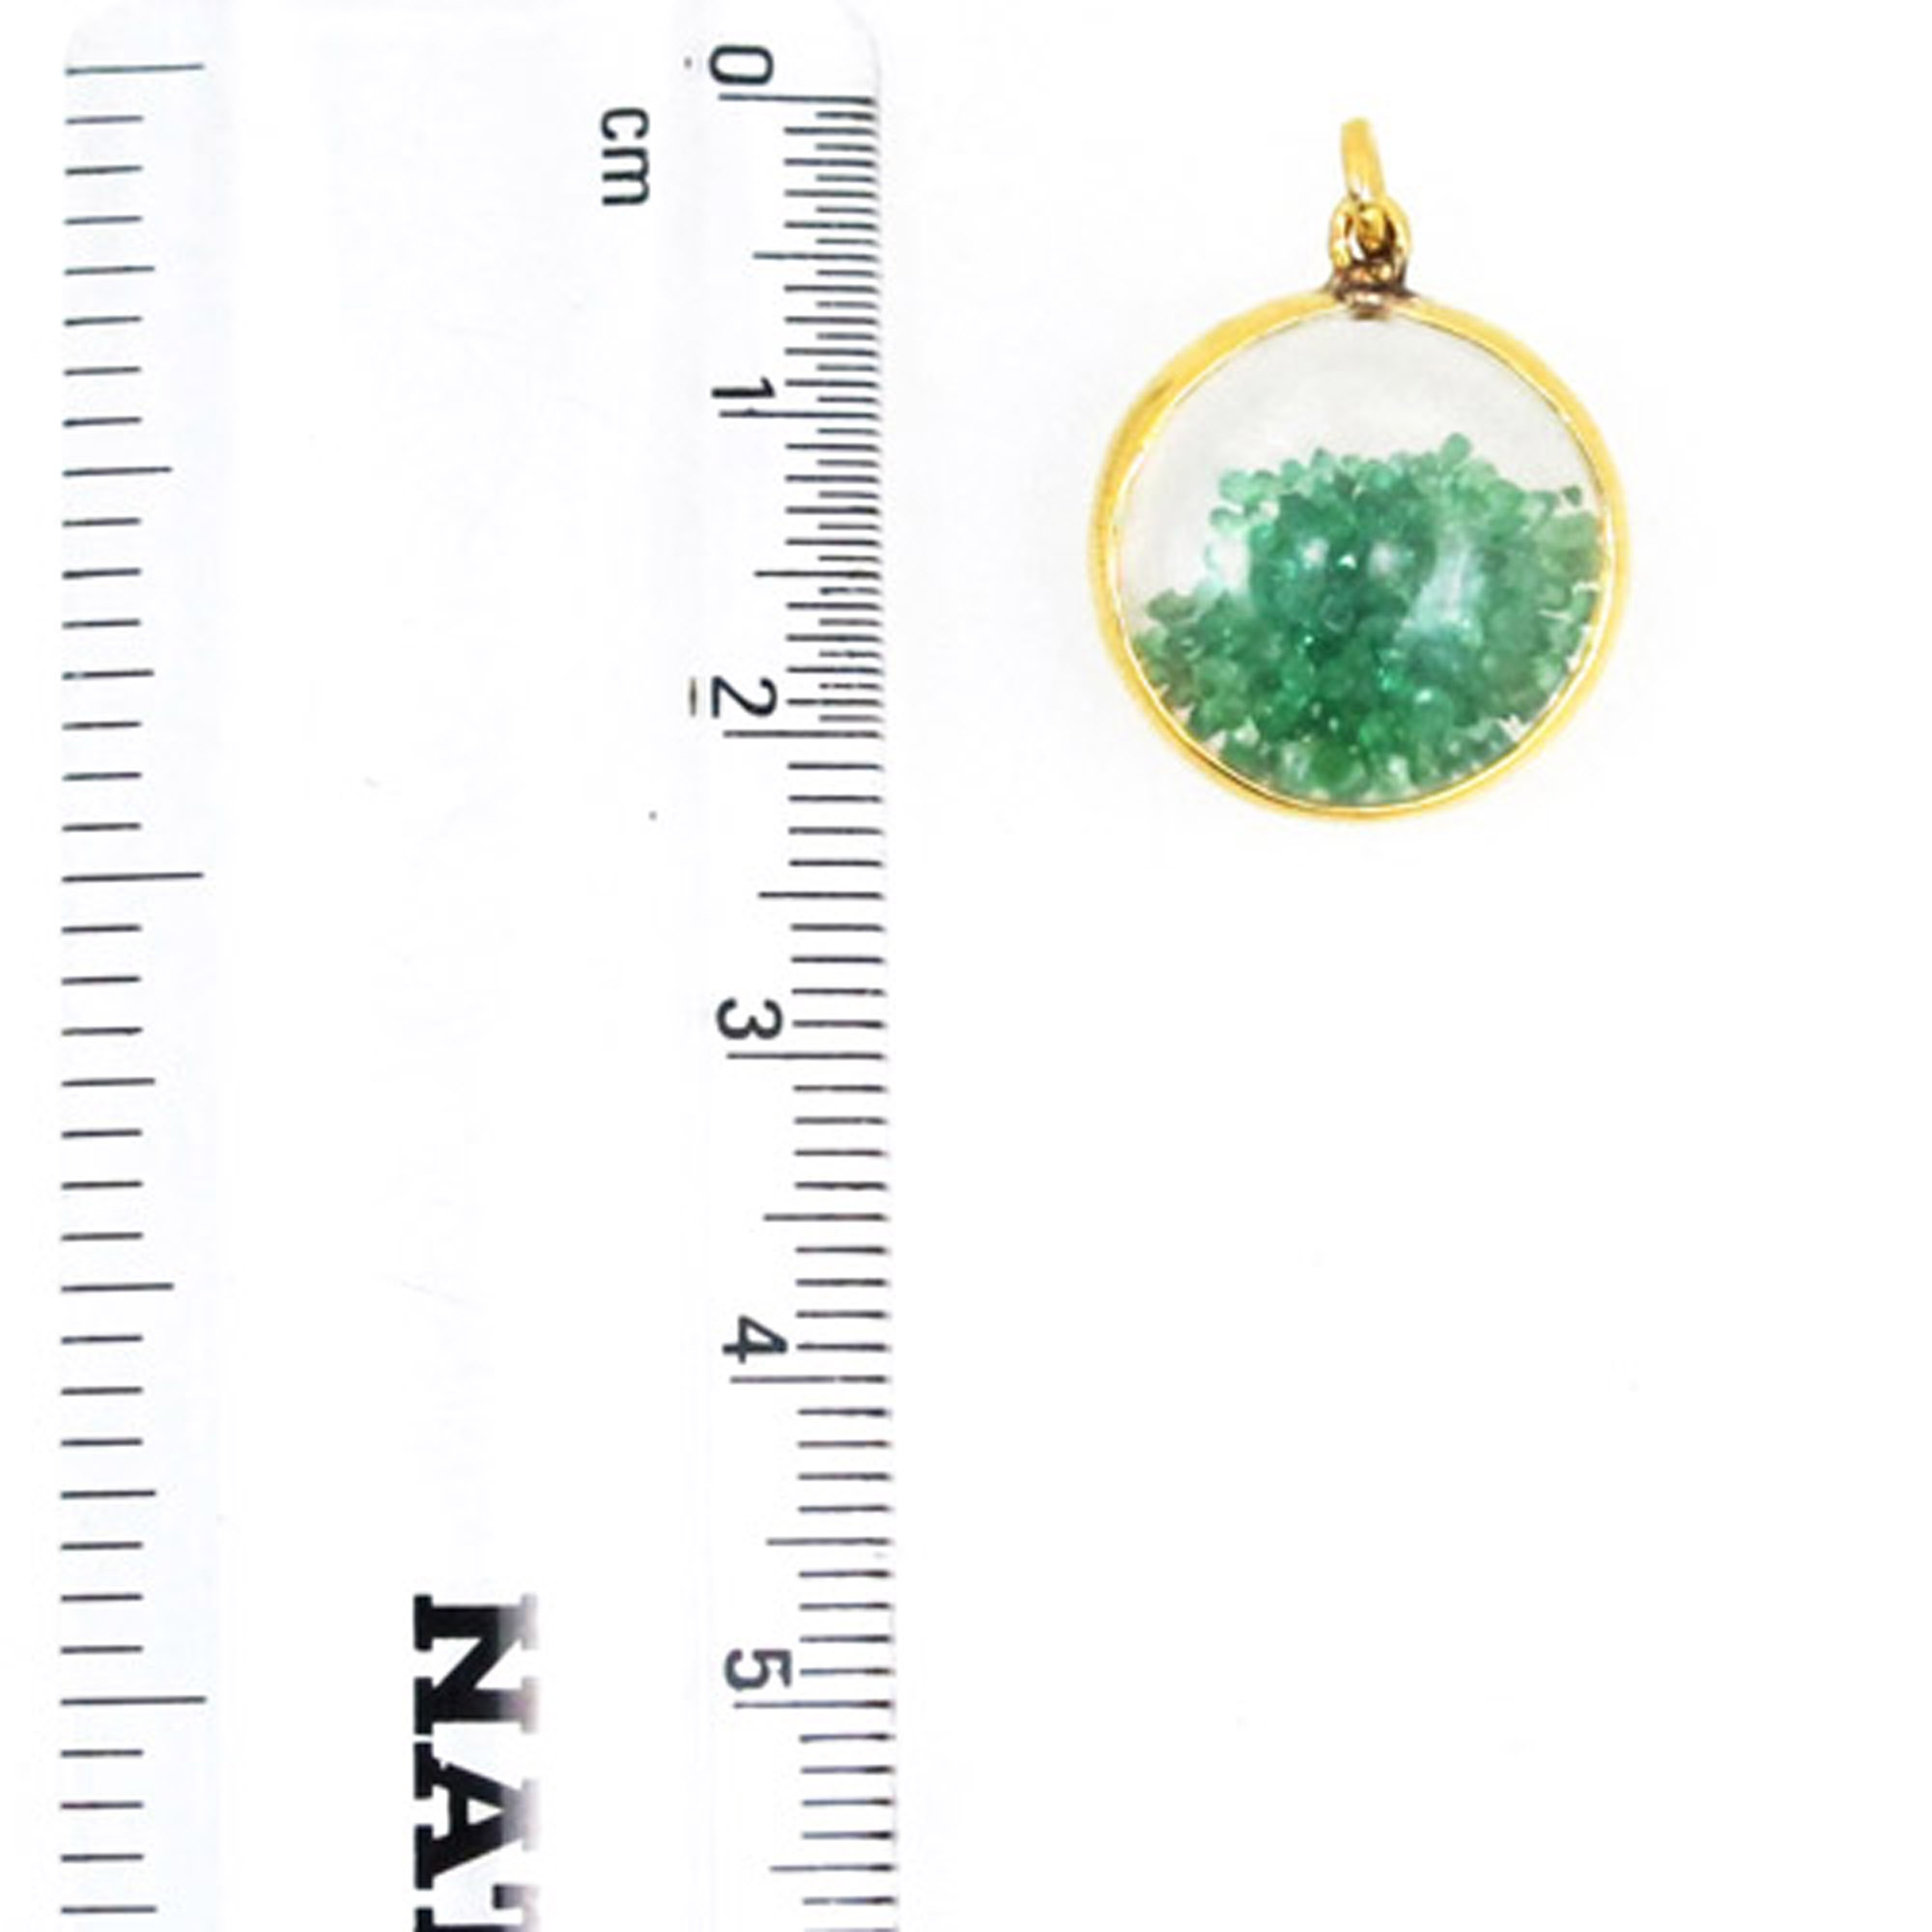 Crystal quartz shaker pendant 14k solid gold with emerald jewelry